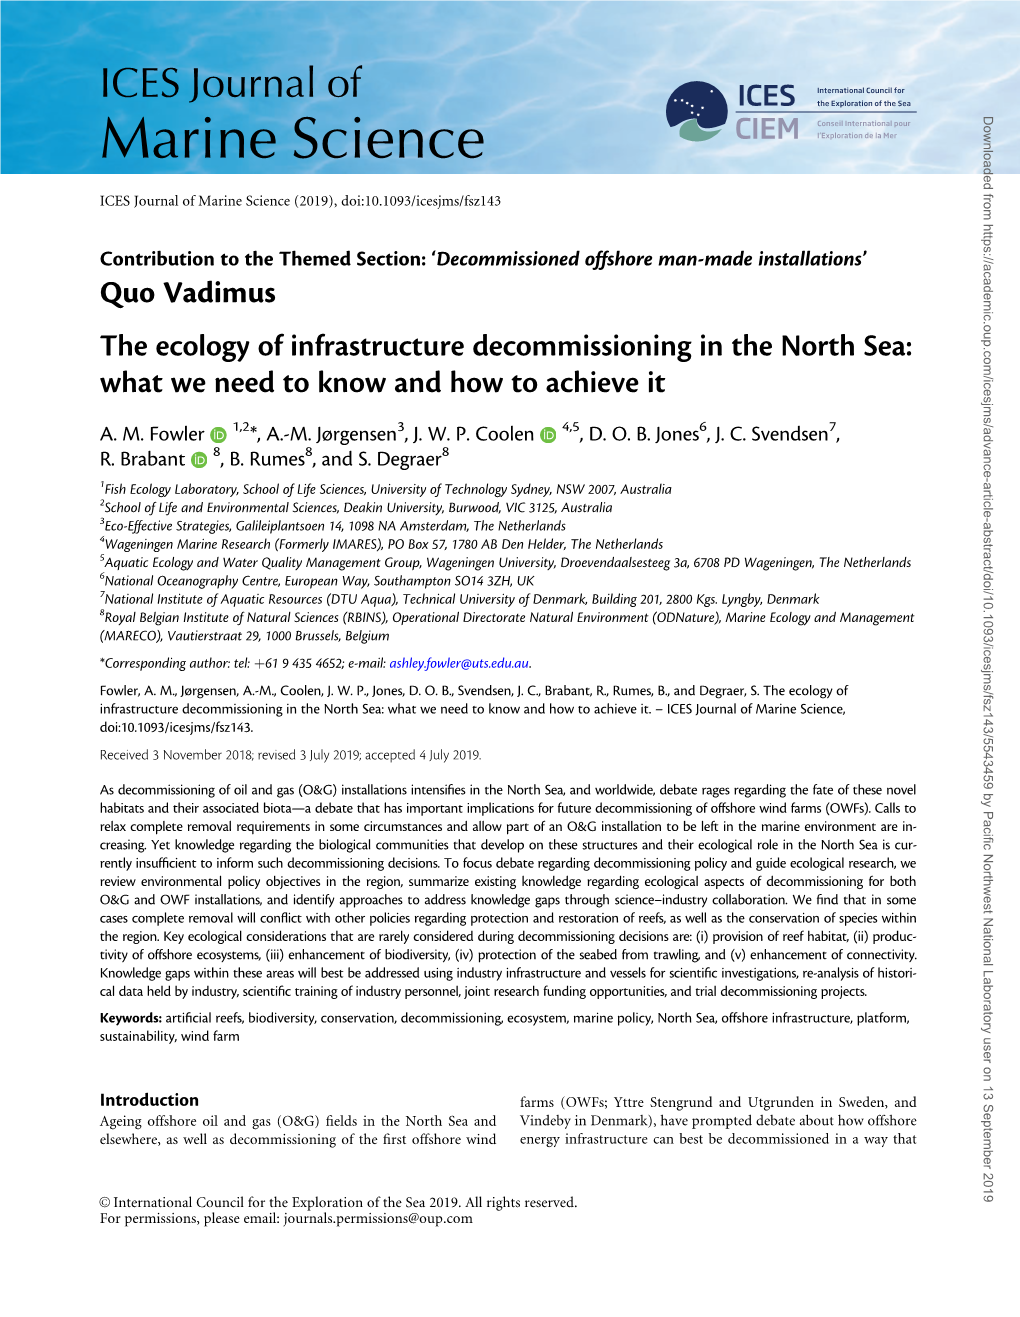 The Ecology of Infrastructure Decommissioning in the North Sea: What We Need to Know and How to Achieve It